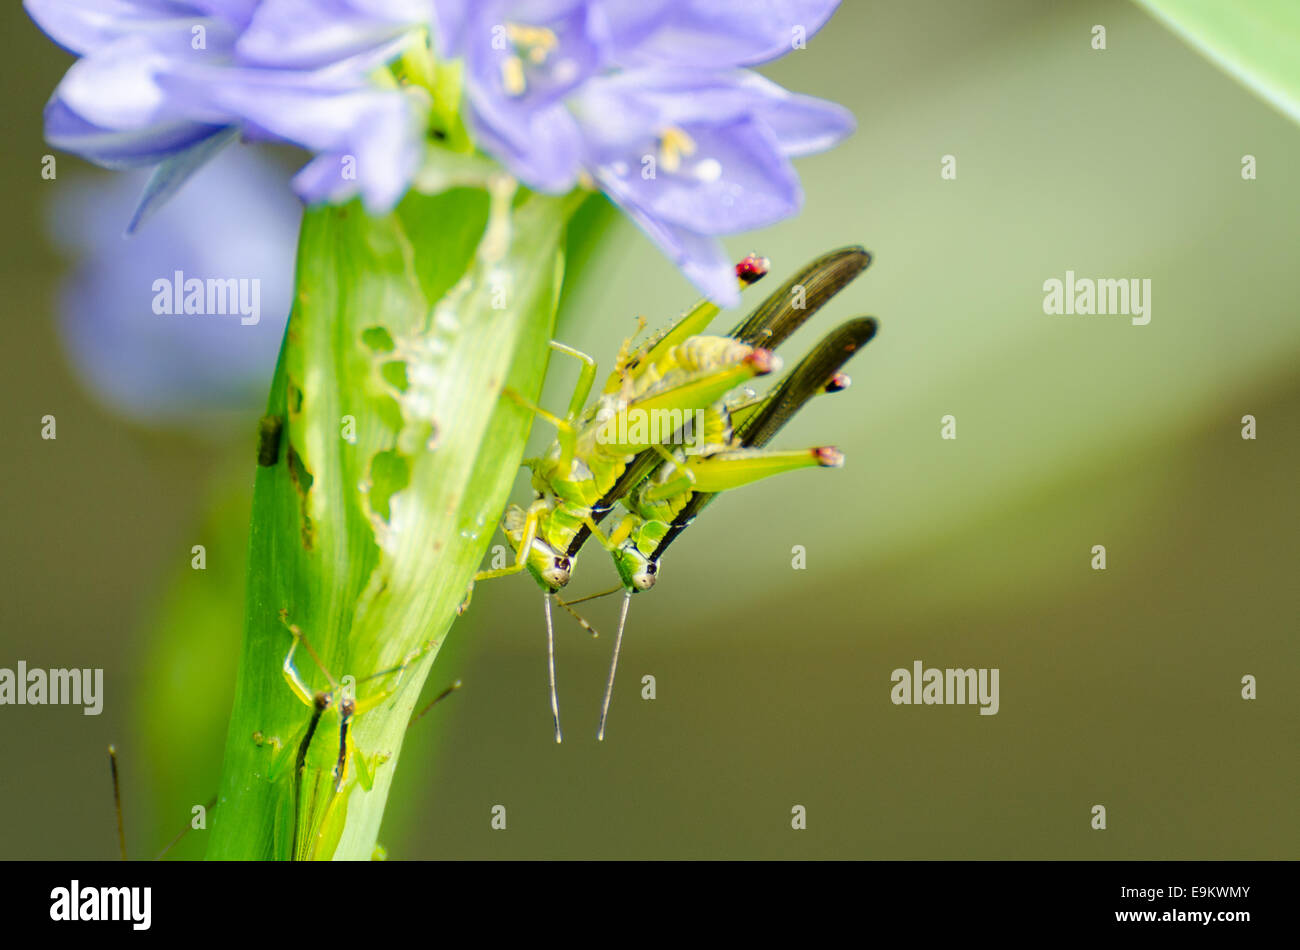 Mating Locust (Oxya japonica) on blue flower of Water hyacinth Stock Photo